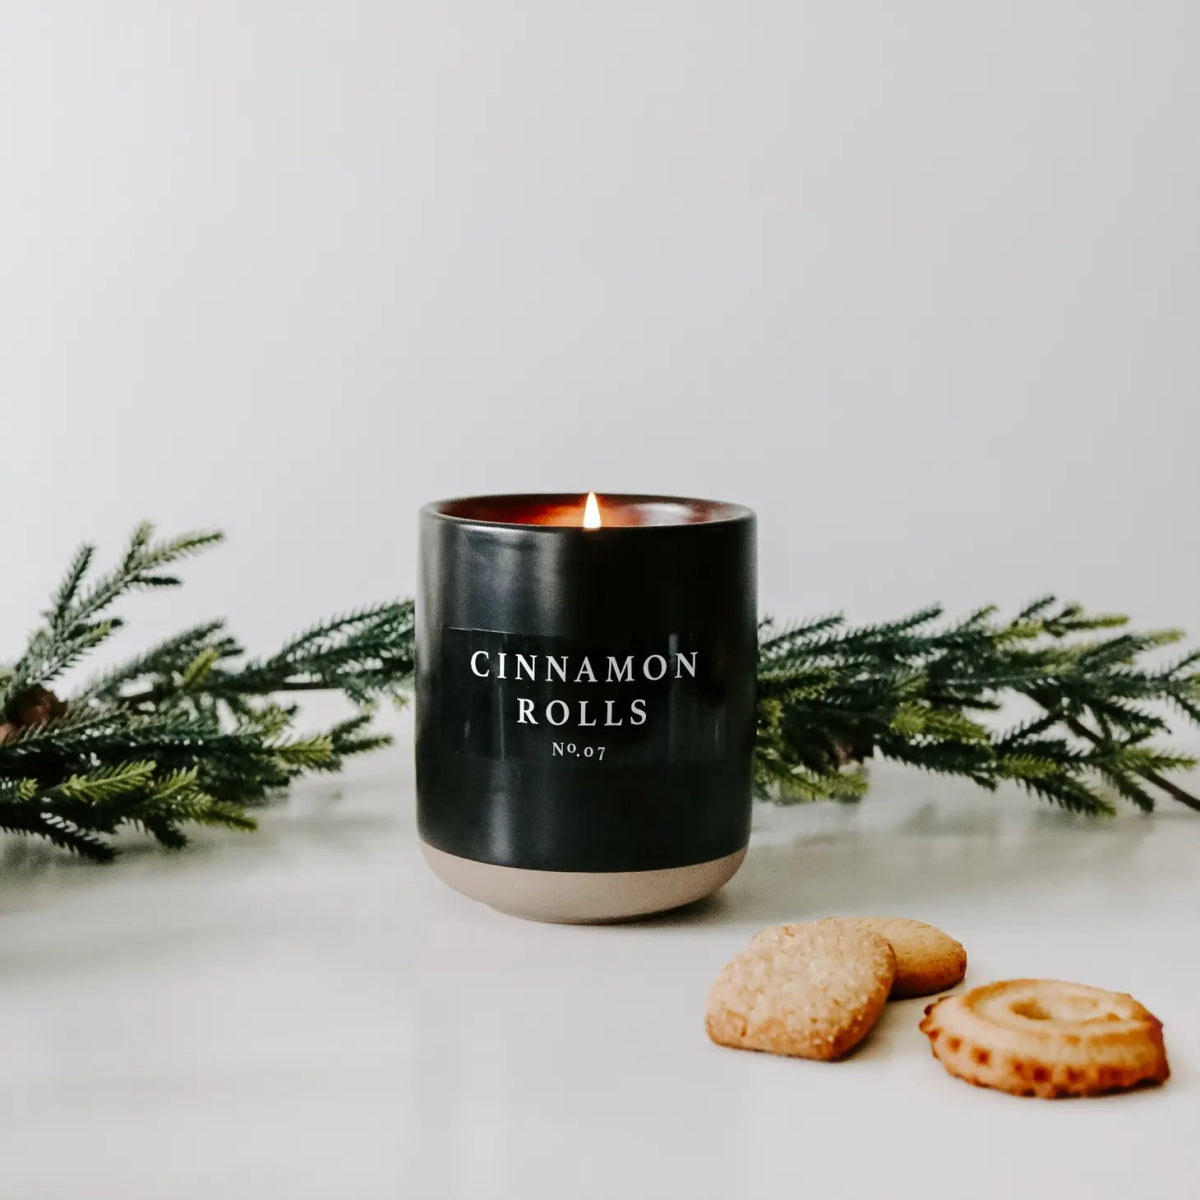 Cinamon Rolls 12 oz Soy Candle - Mindful Living Home